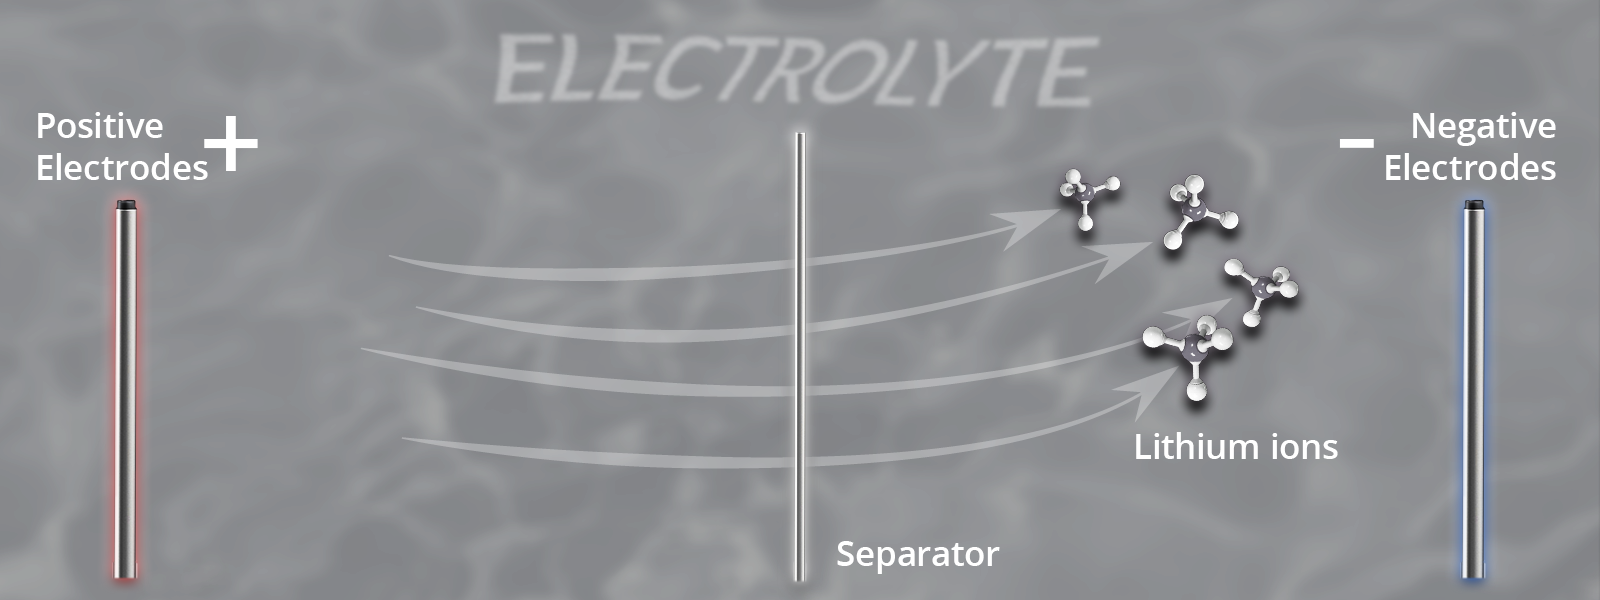 A simplified visual representation of how charging works featuring electrolyte, cathode, anode, separator, and lithium ion particles